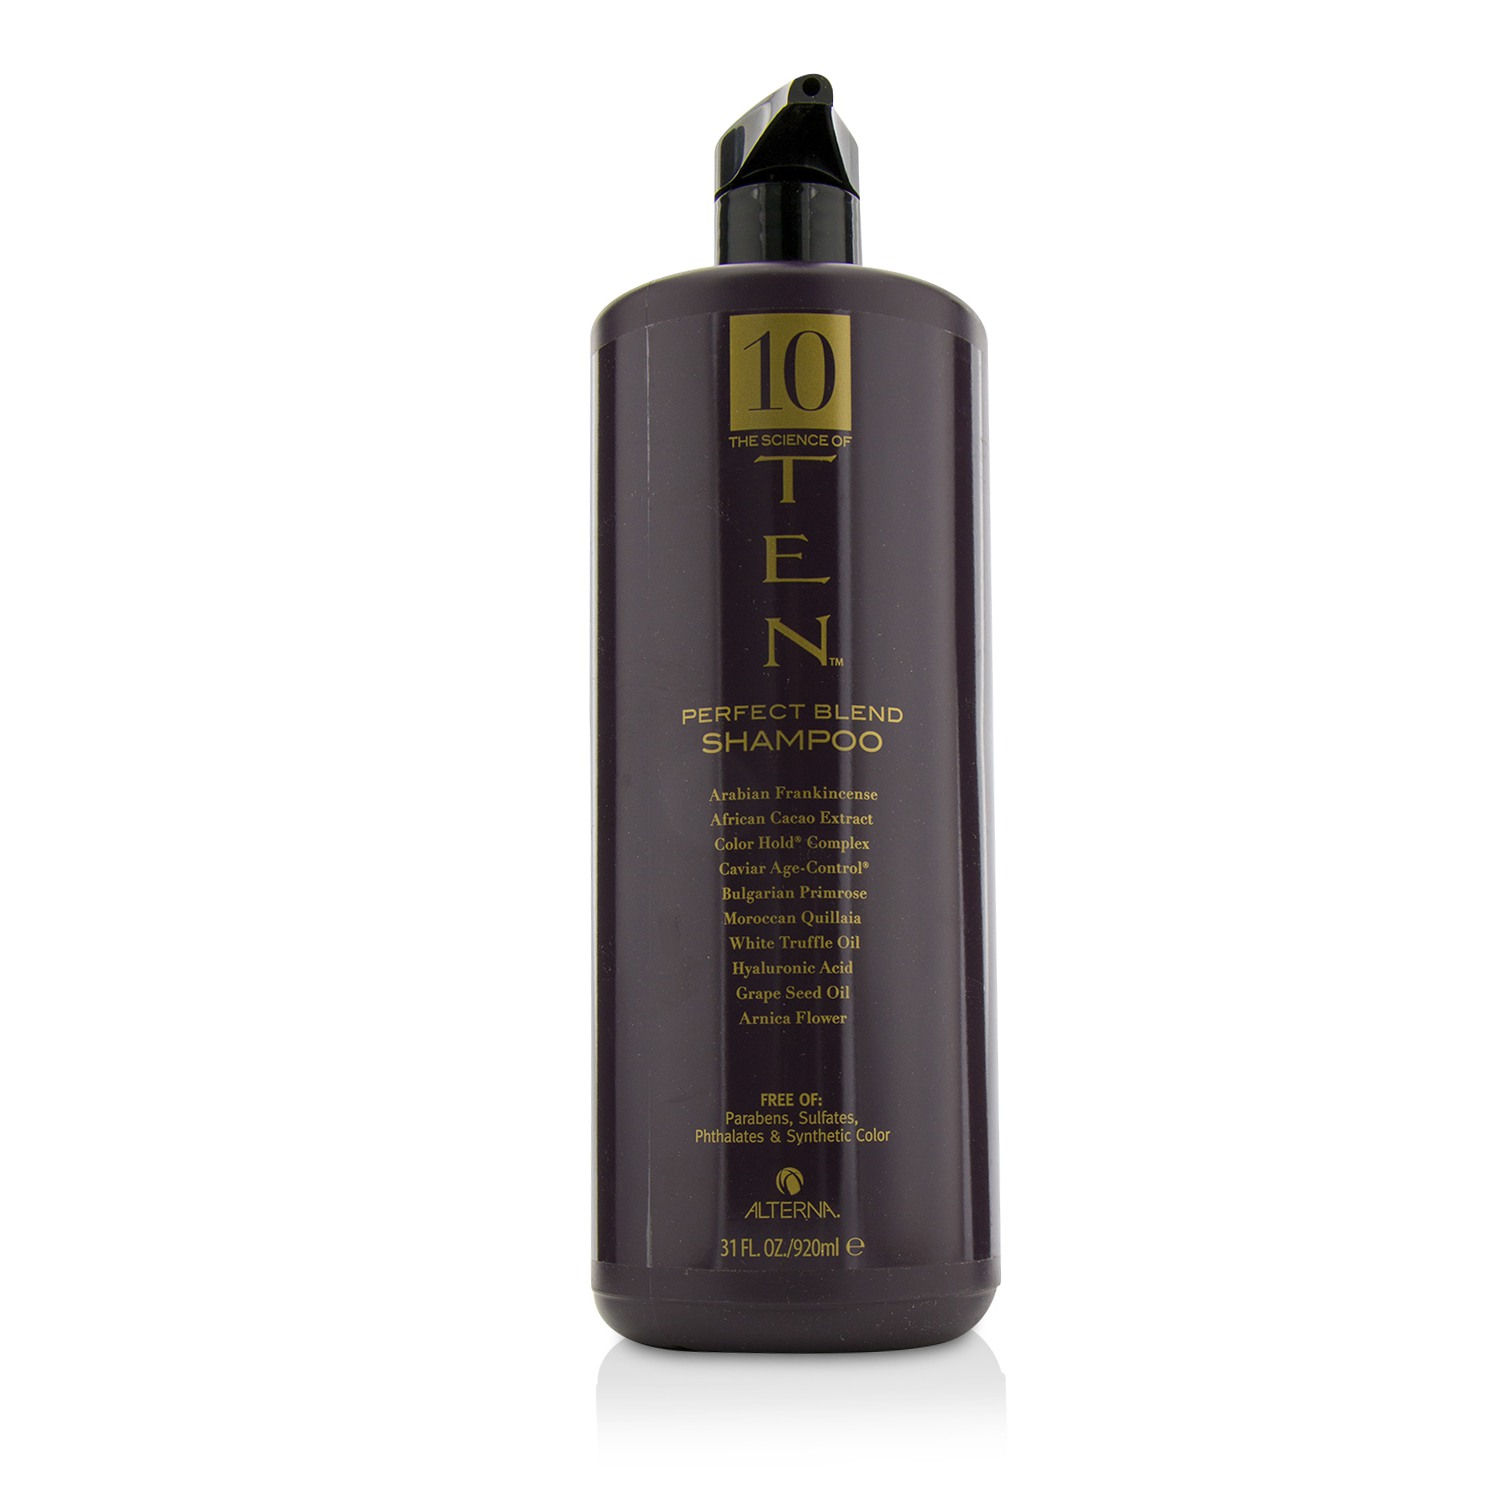 10 The Science of TEN Perfect Blend Shampoo Alterna Image